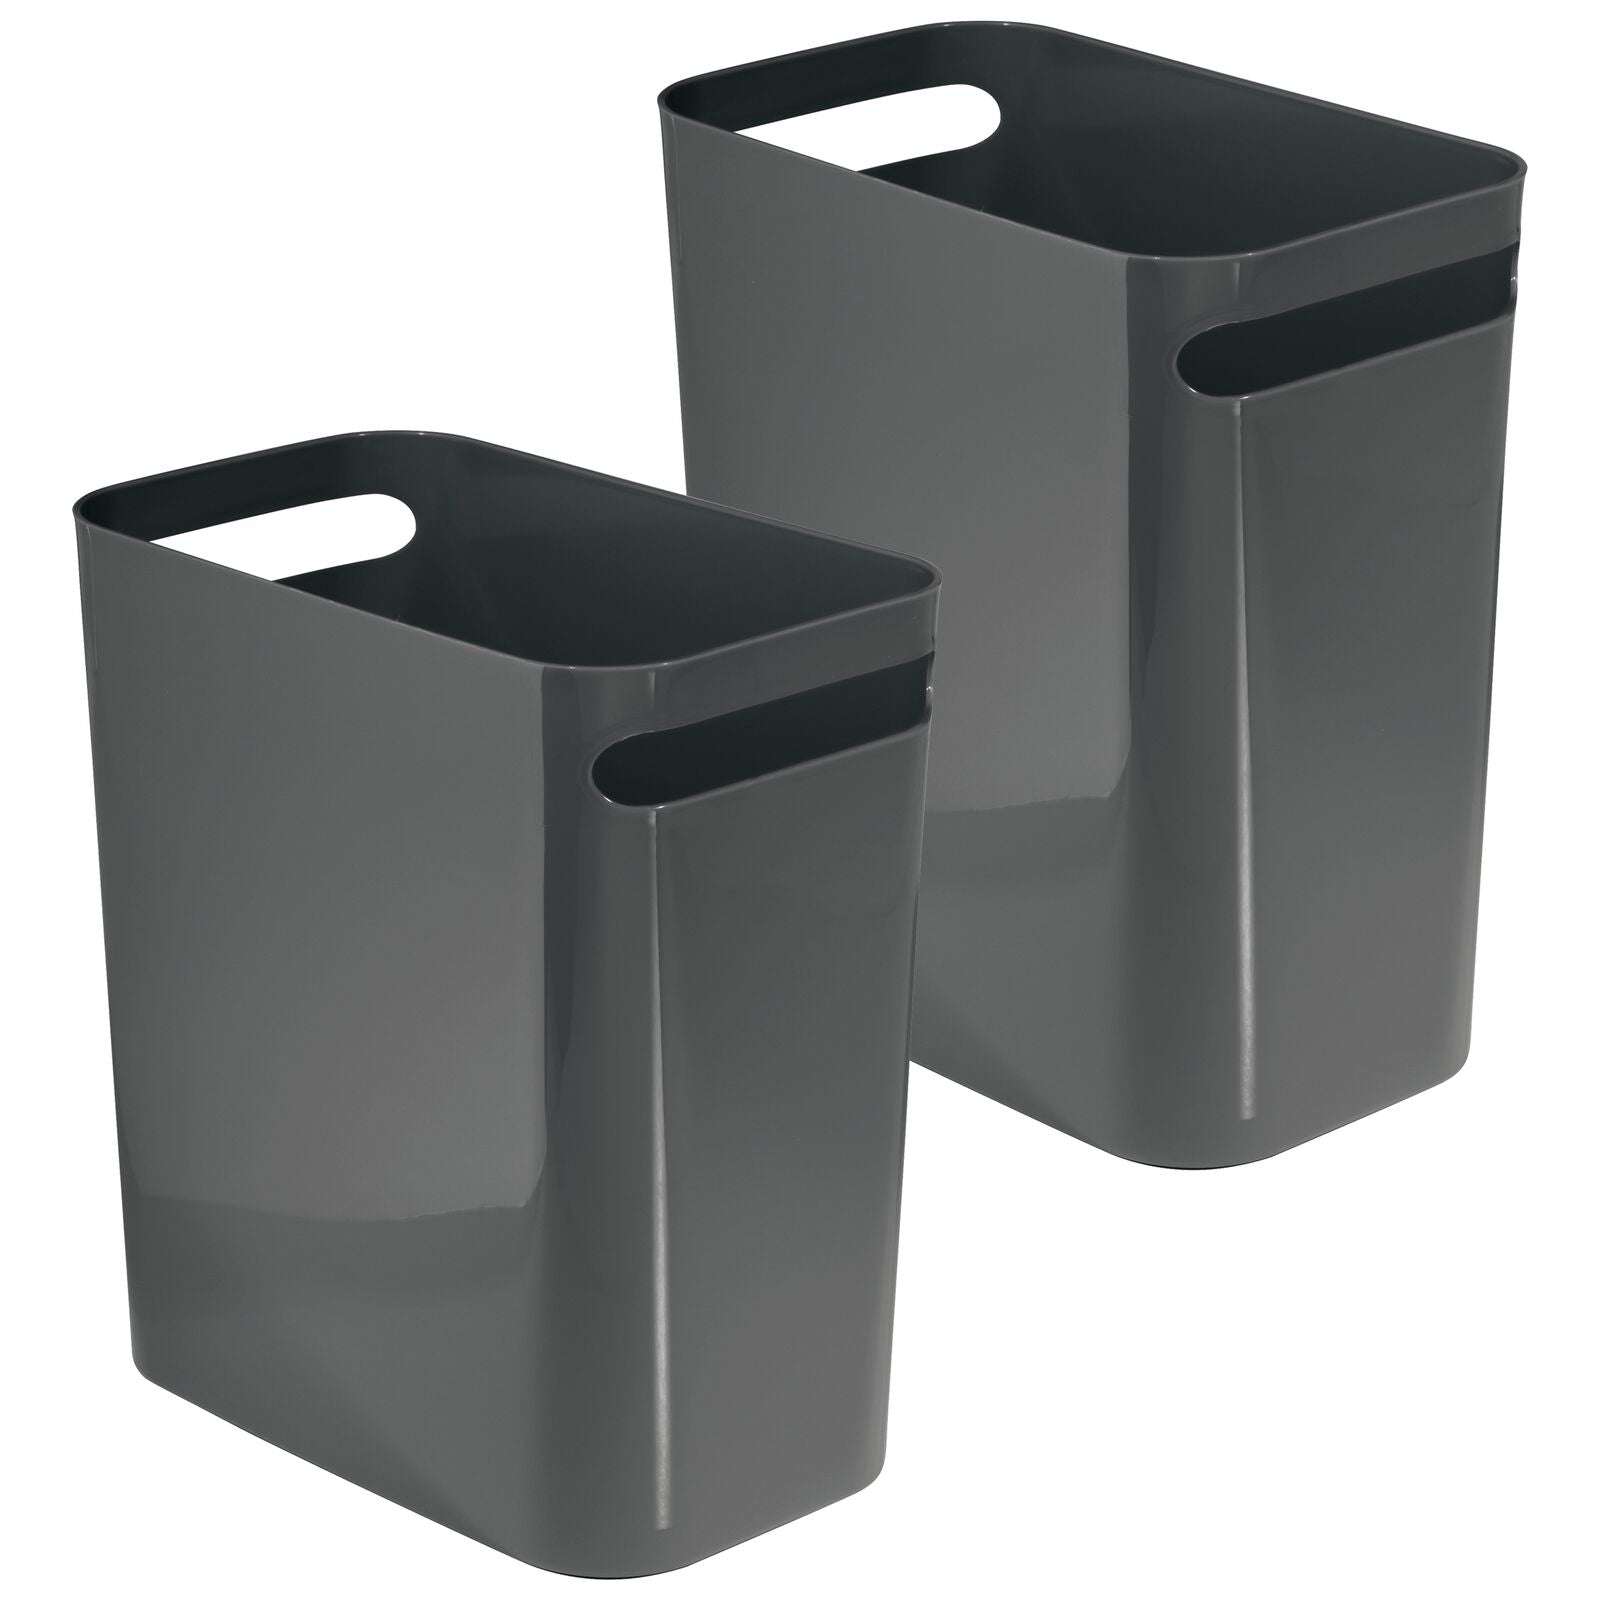 9.5-Liter Trash Can with Handles